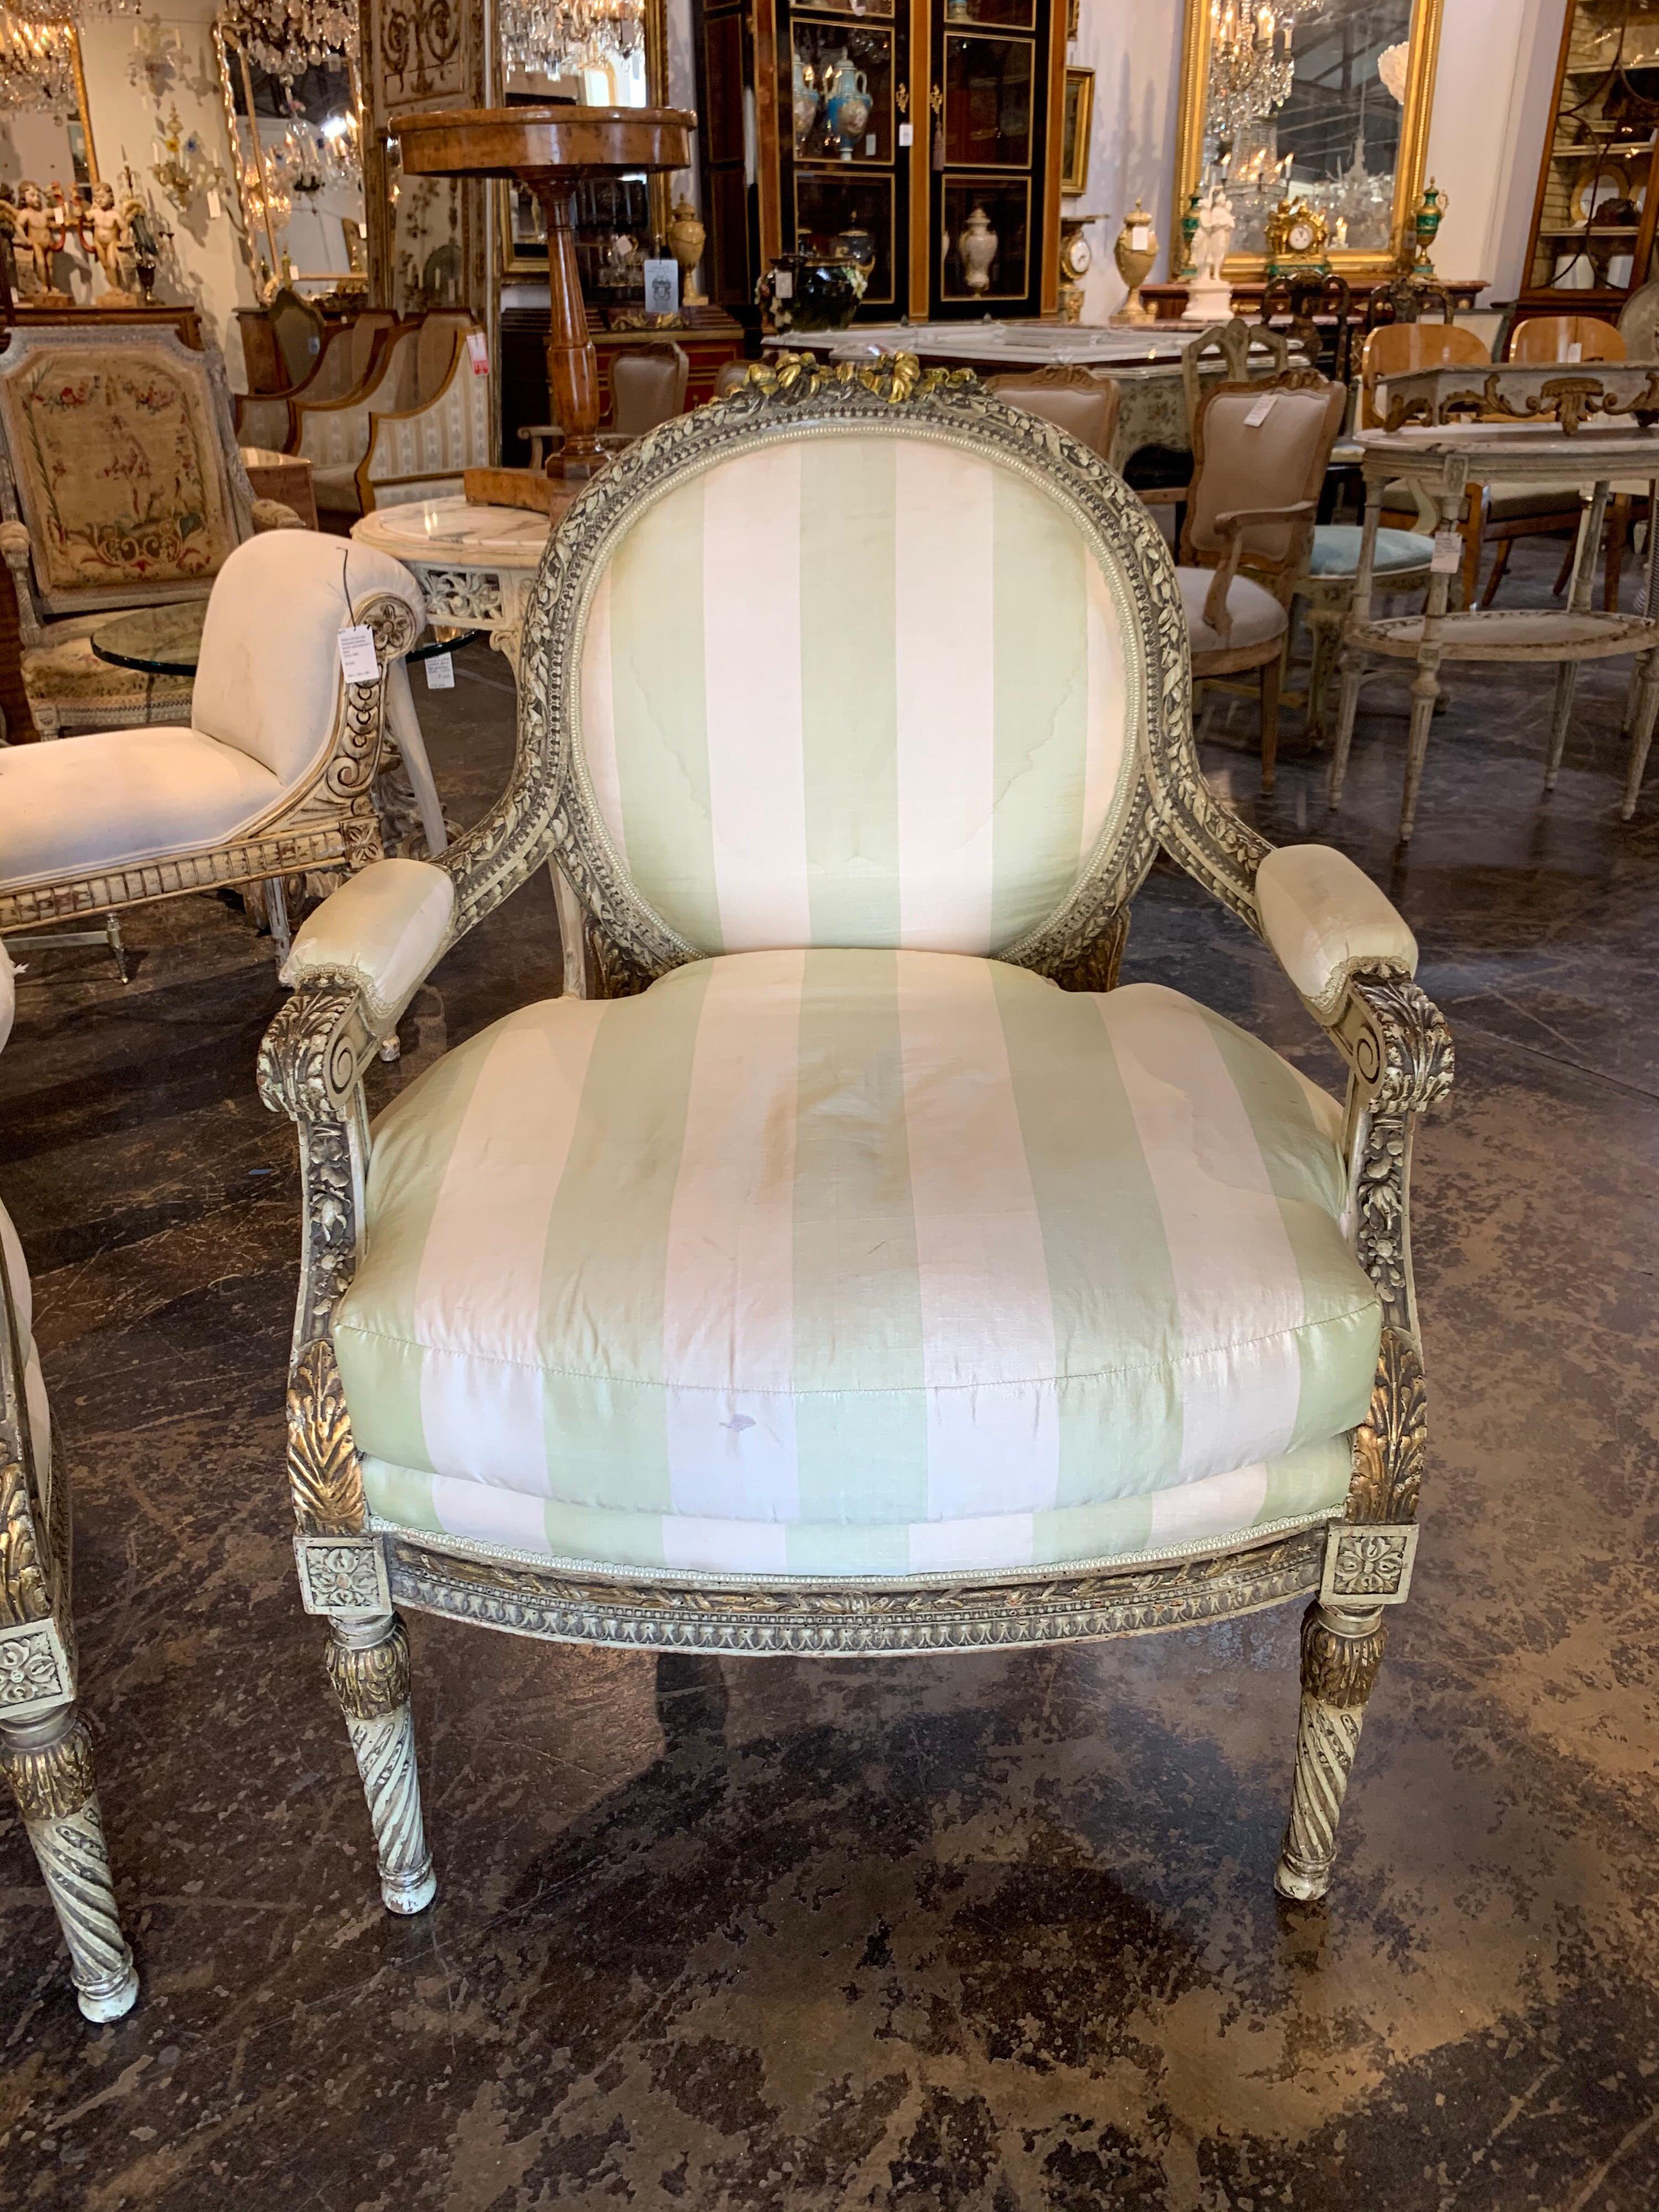 Beautiful large scale 19th century French Louis XVI Fauteuils upholstered in a pale green and crème colored silk. The wood frame has very fine carvings with touches of gold gilt. Very comfortable chairs as well! Note: There are a few stains on the